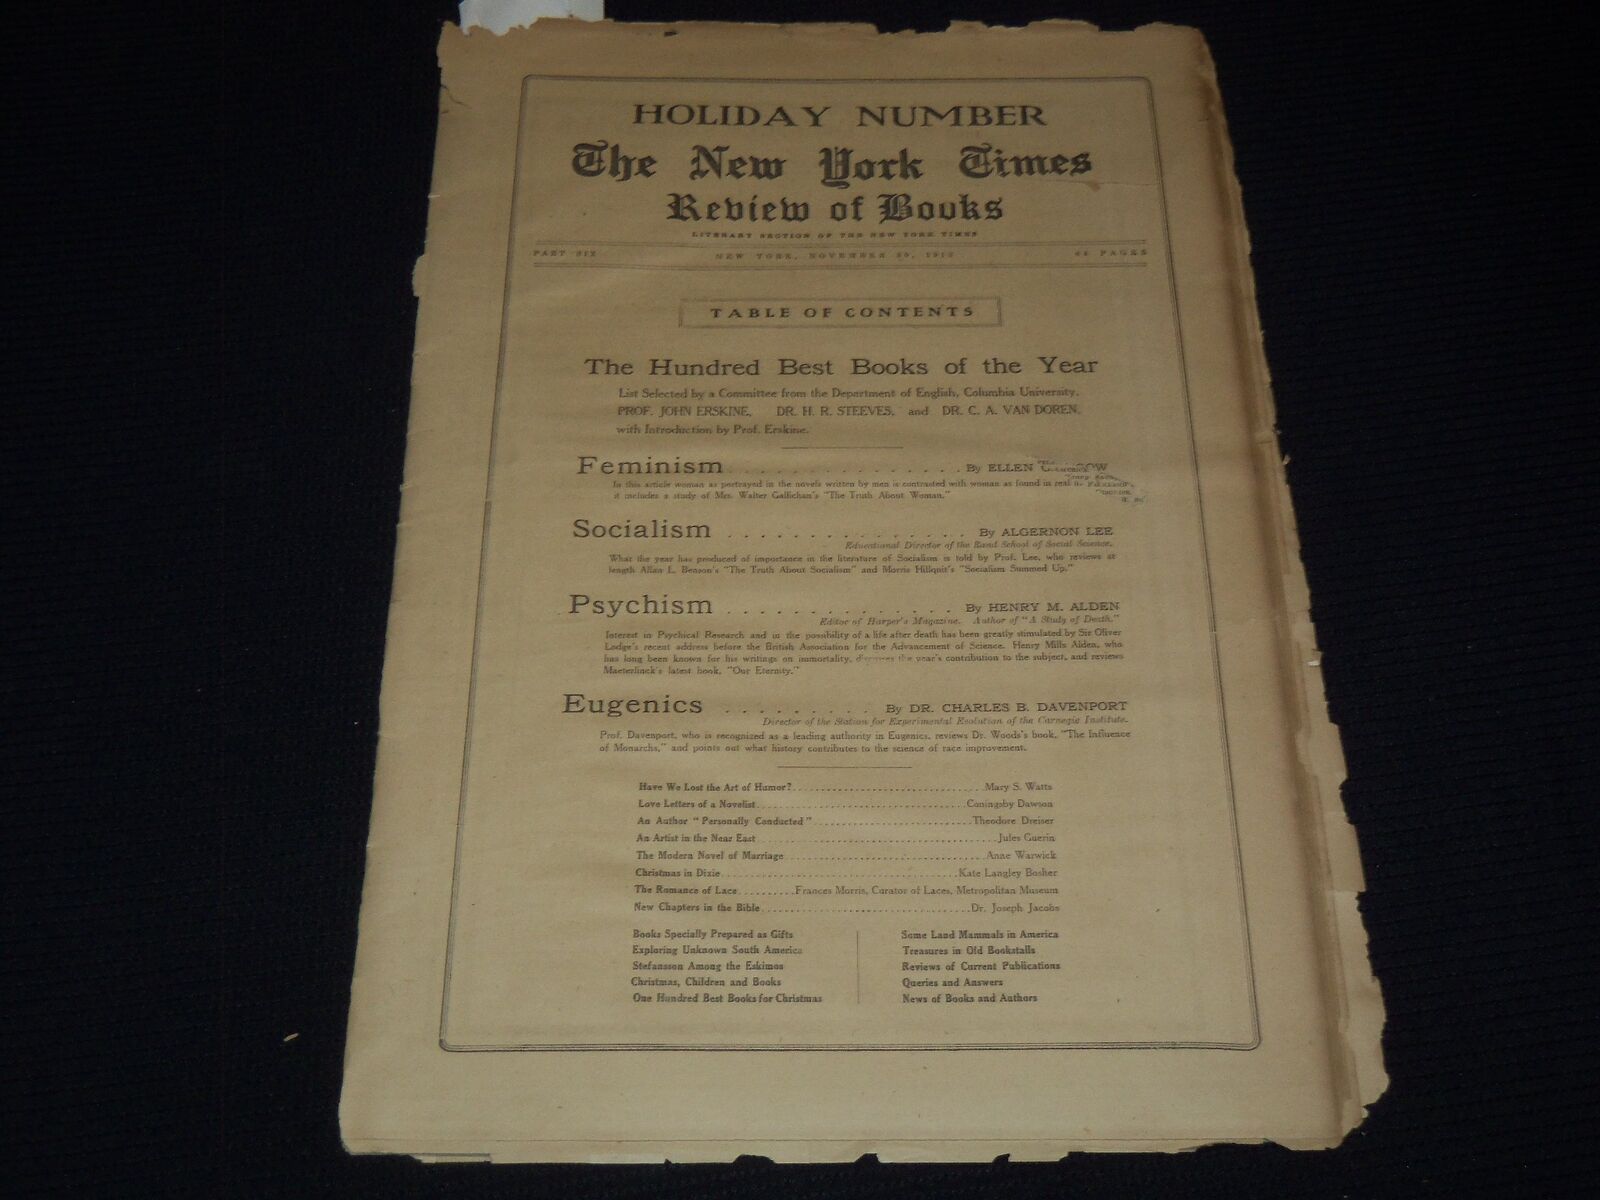 1913 NOVEMBER 30 NEW YORK TIMES REVIEW OF BOOKS - HOLIDAY NUMBER - NP 2152W